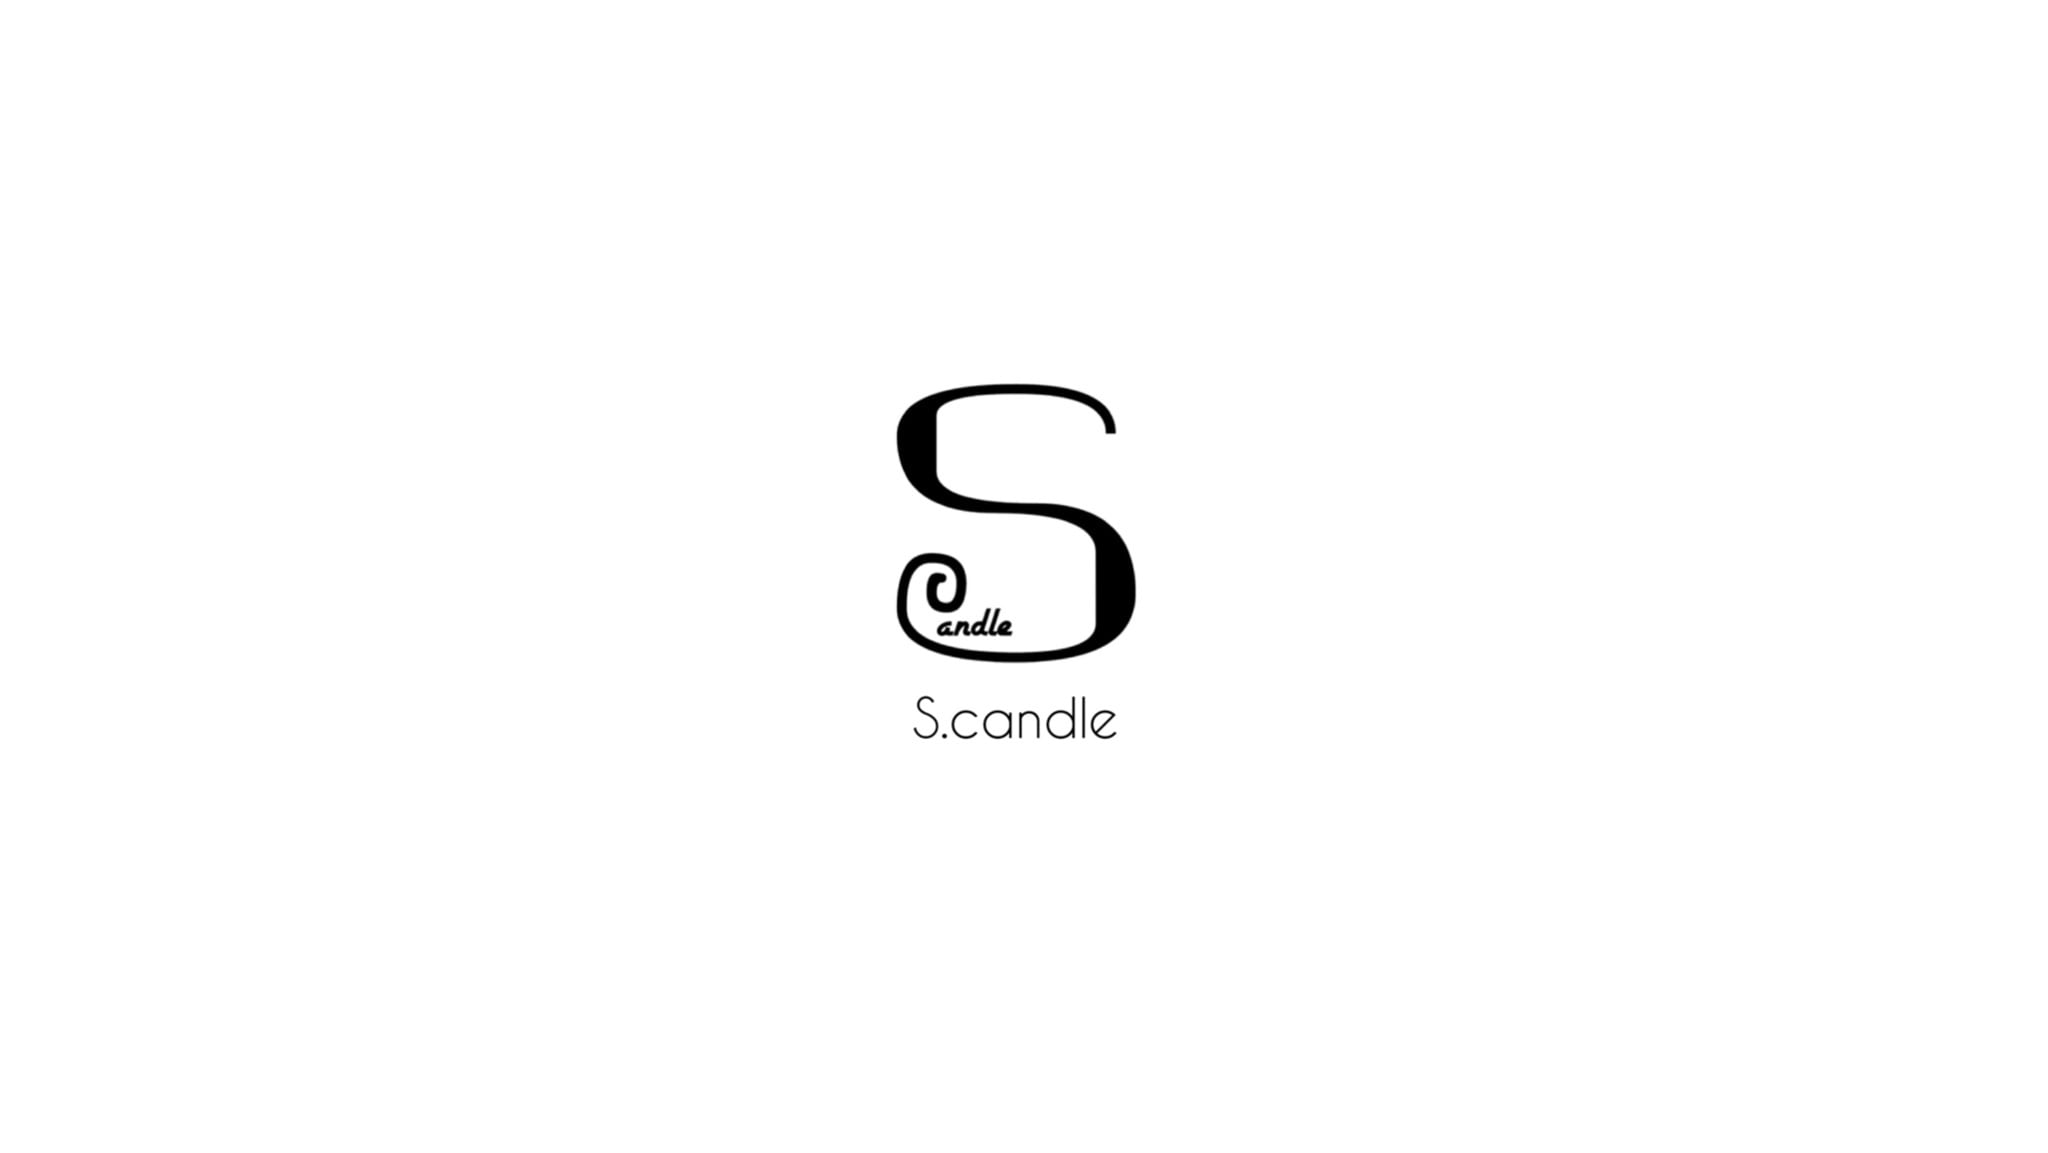 S.candle